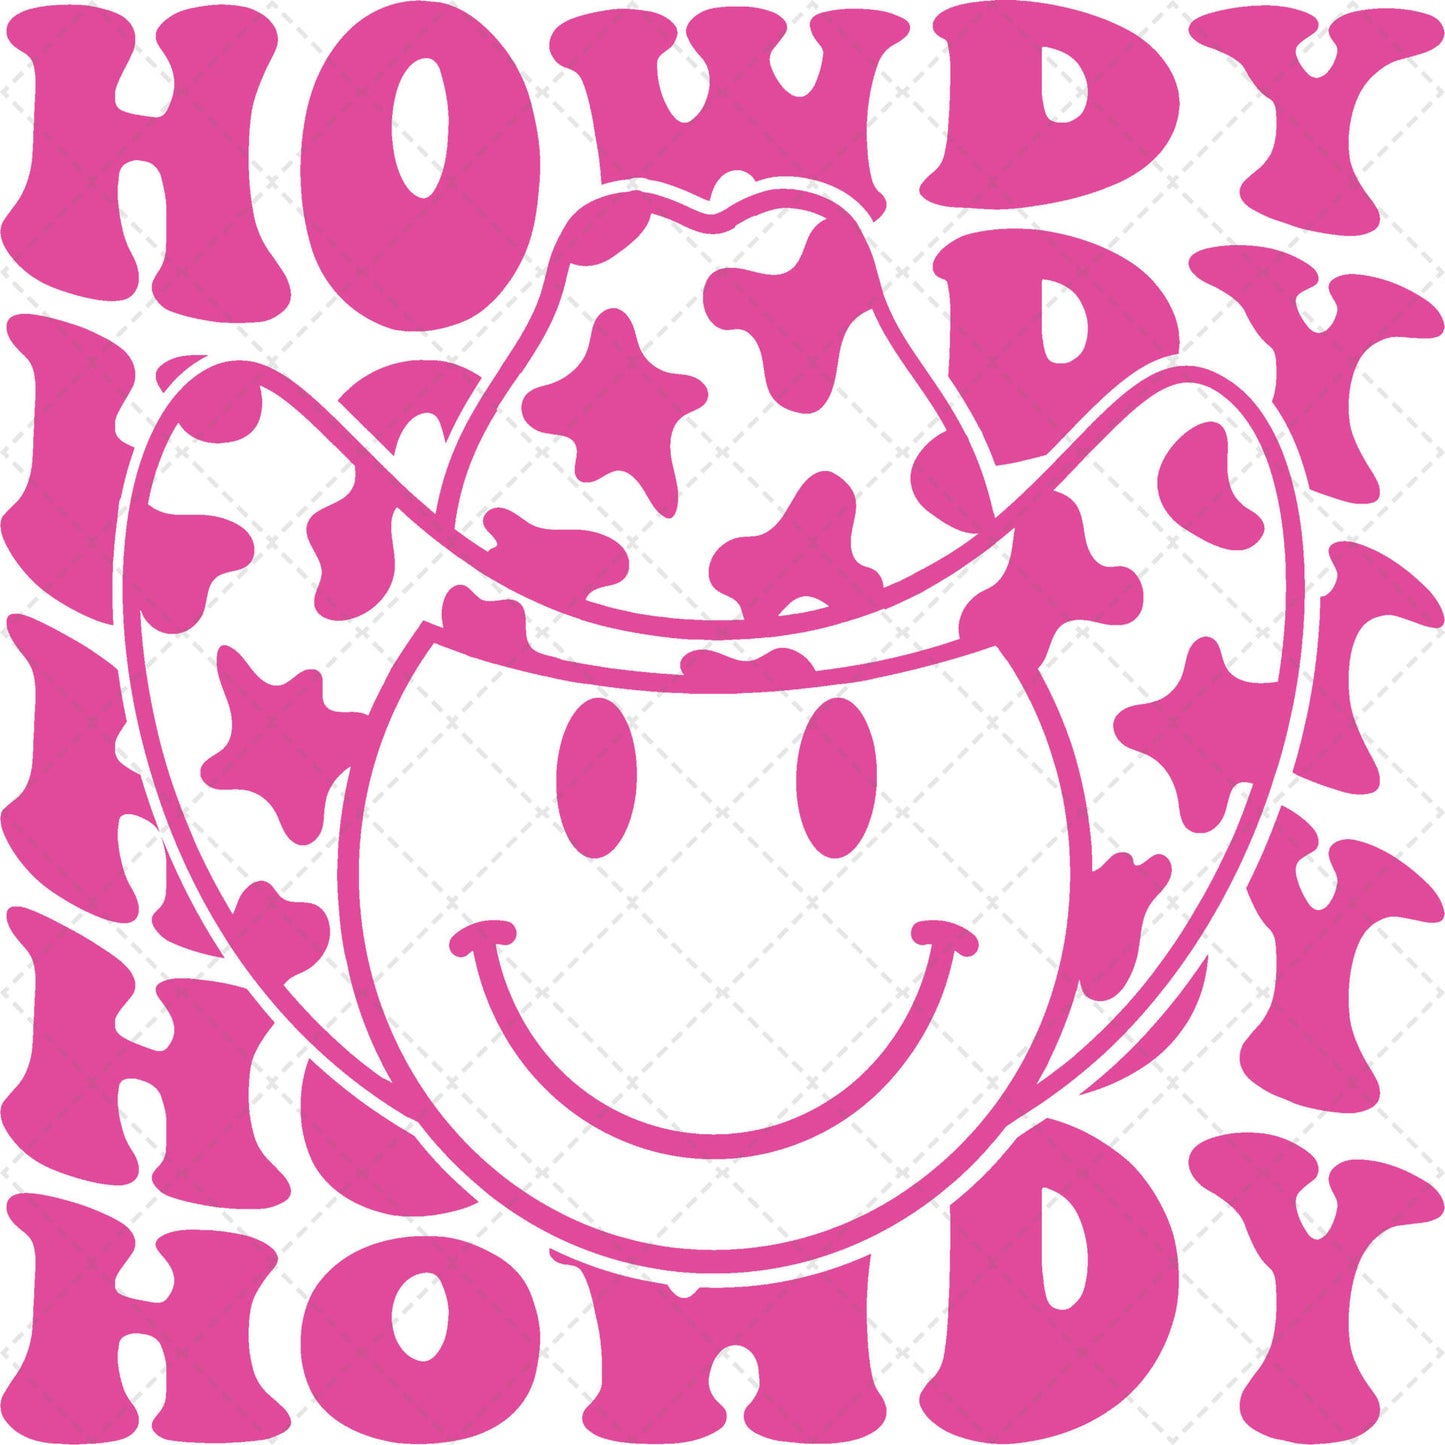 Howdy Pink Smiley Transfer